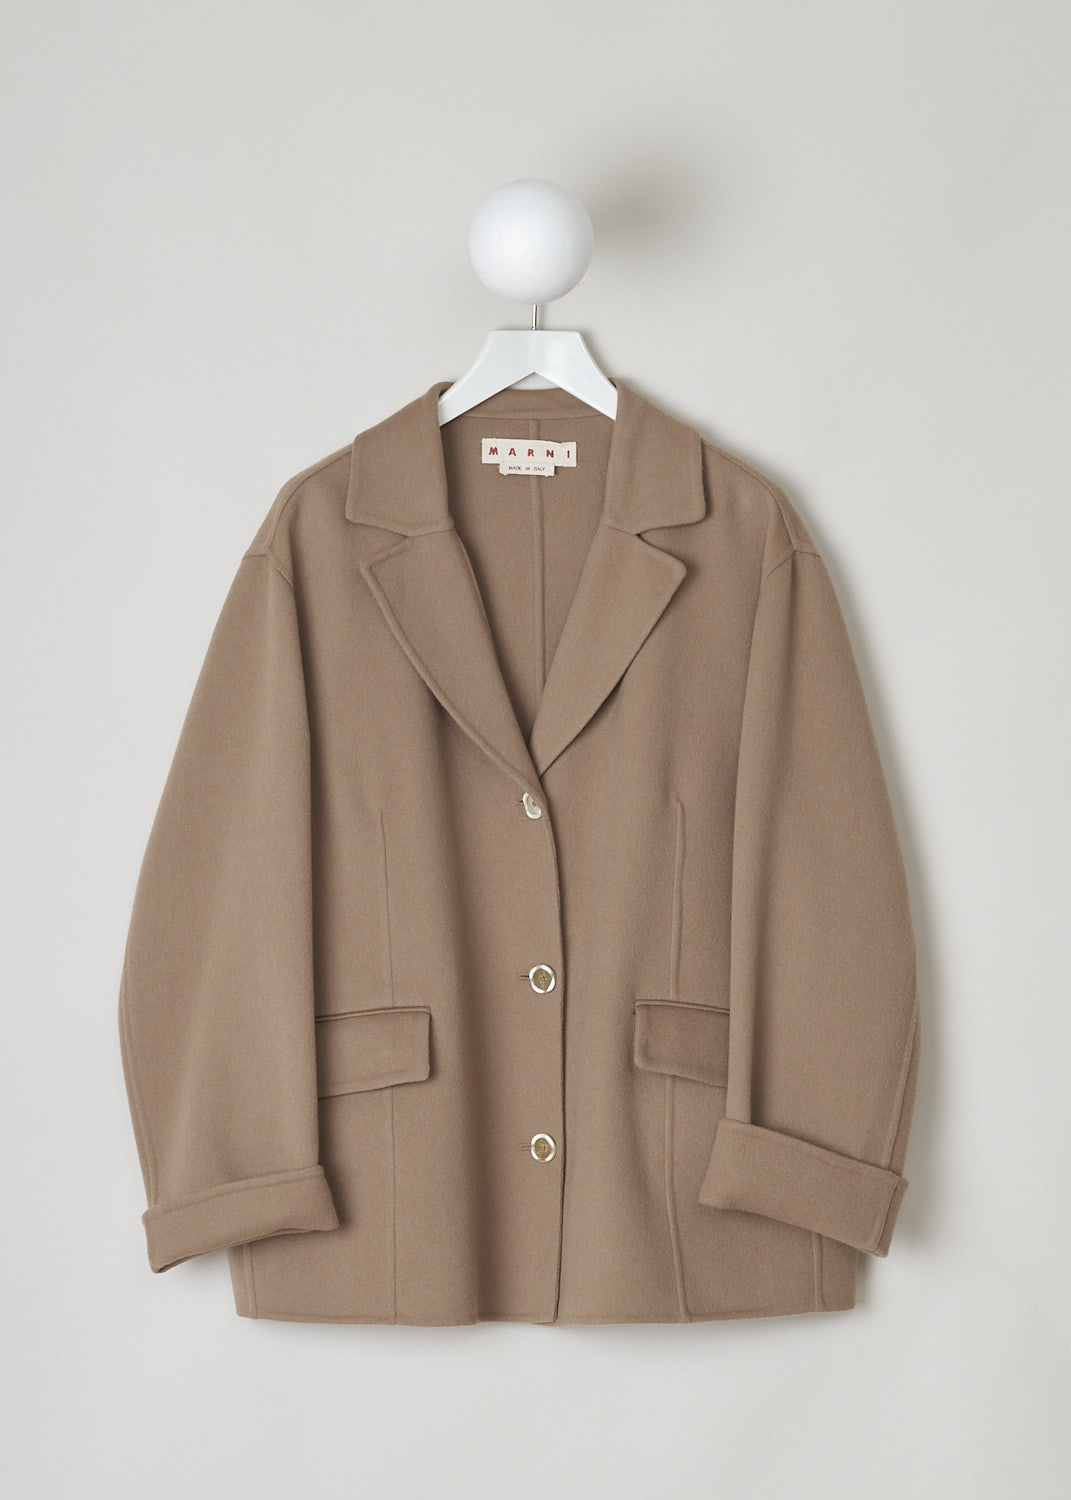 MARNI, CAMEL COLORED WOOL-BLEND COAT, GIMA0161KO_TW840_00M02, Brown, Front, This short camel-colored coat has an wider silhouette. The coat has a notched lapel and a front button closure. On the front, the coat has two welt pockets with flap. The long sleeves have rolled cuffs. The coat has a vertical centre seam across the back. 
